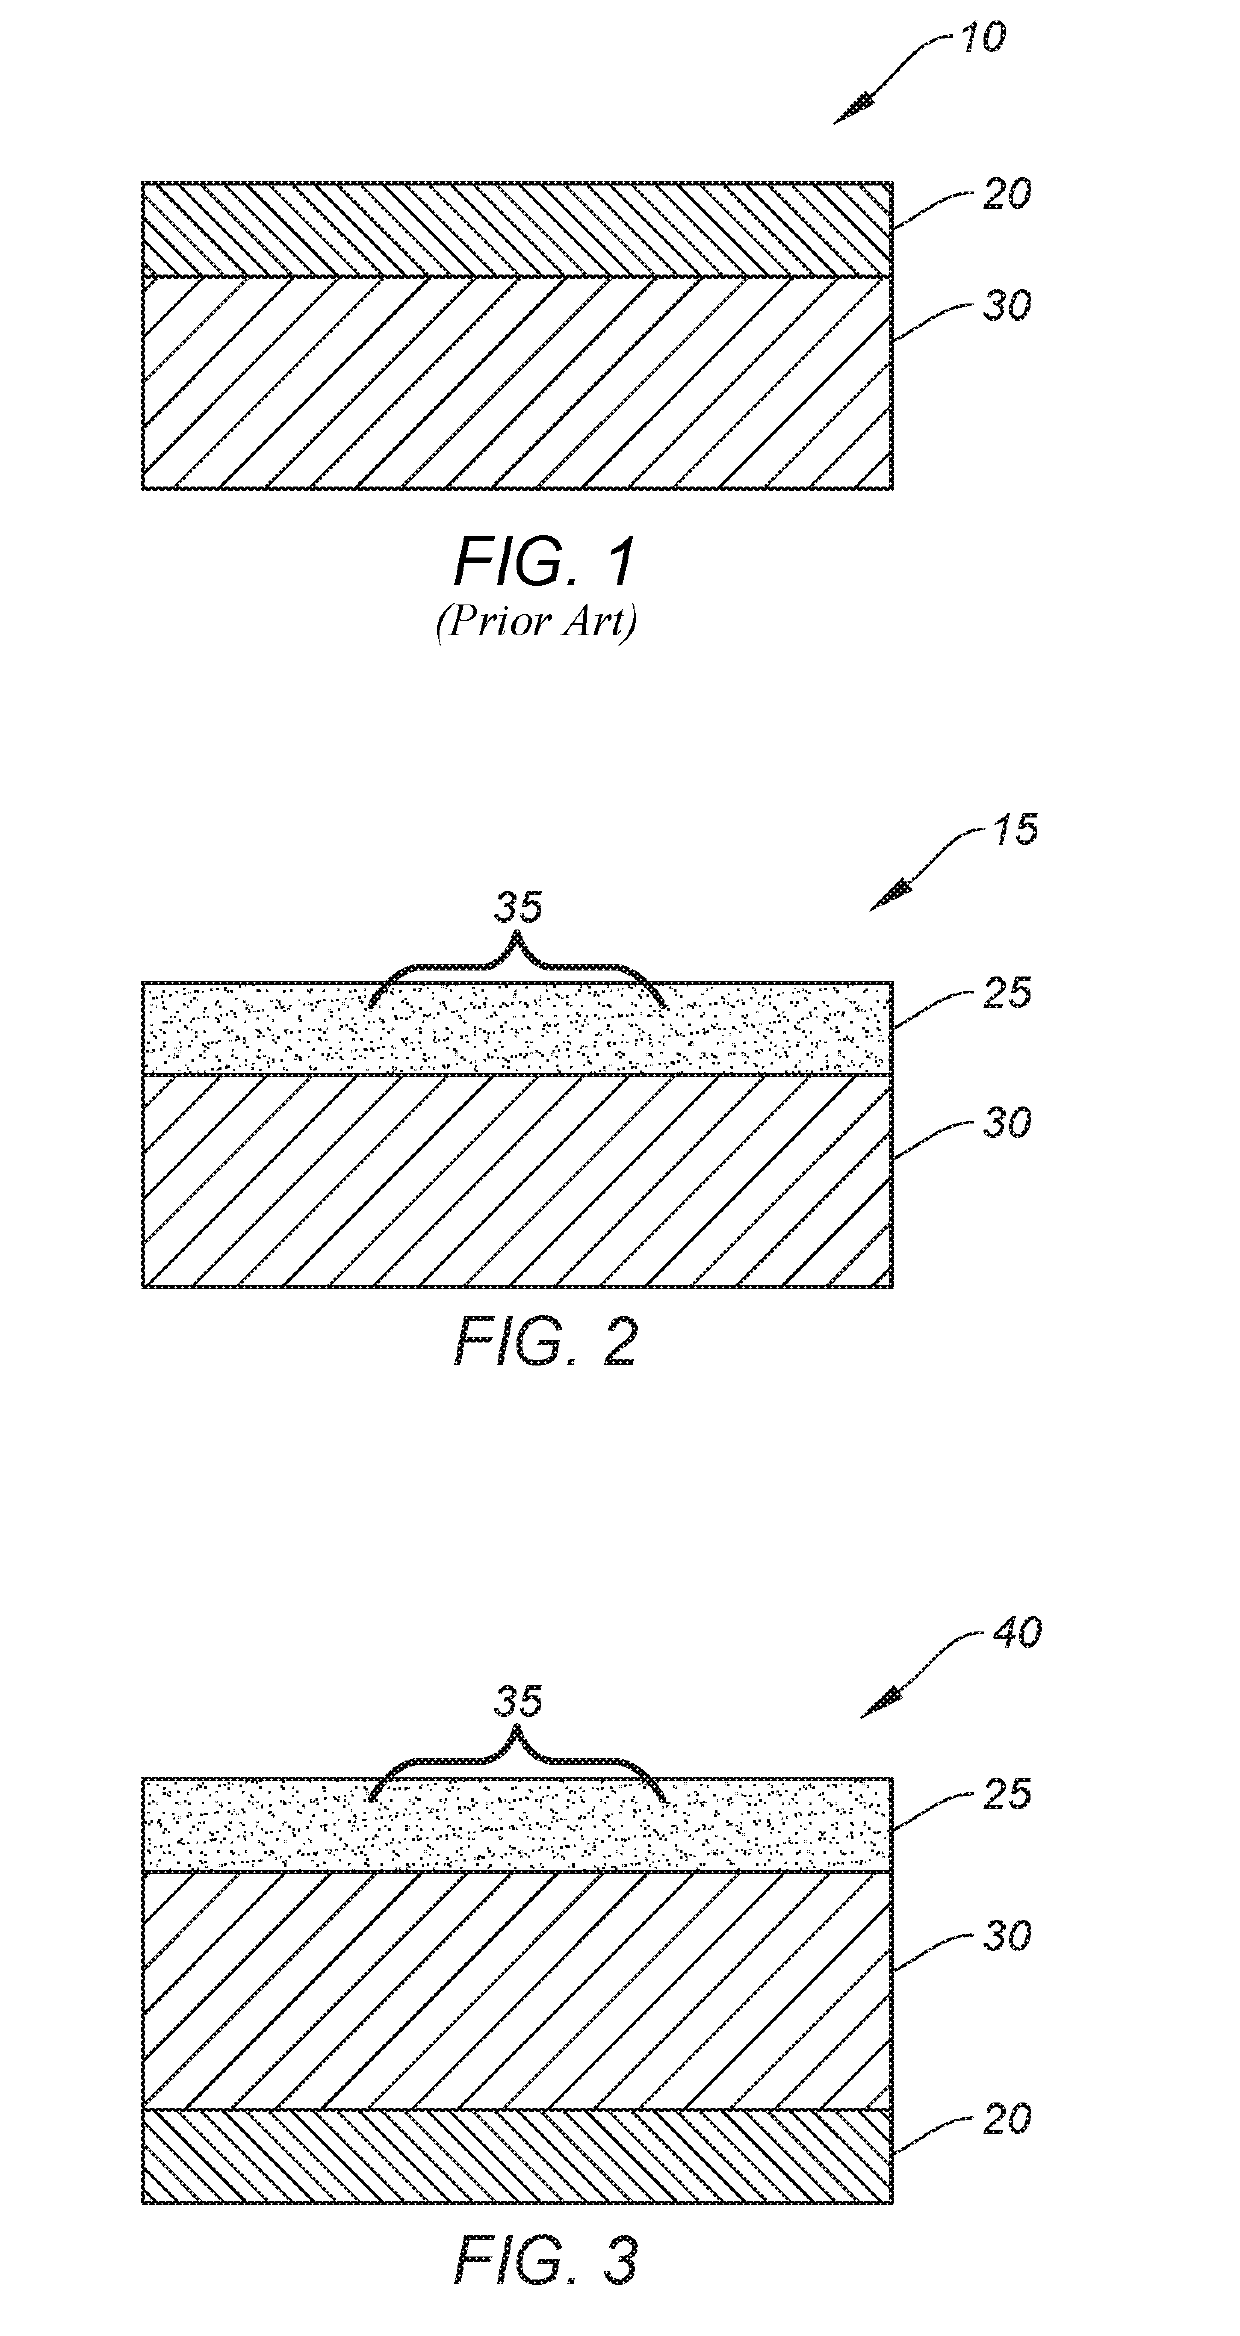 Kinetic piezoelectric capacitor with co-planar patterned electrodes